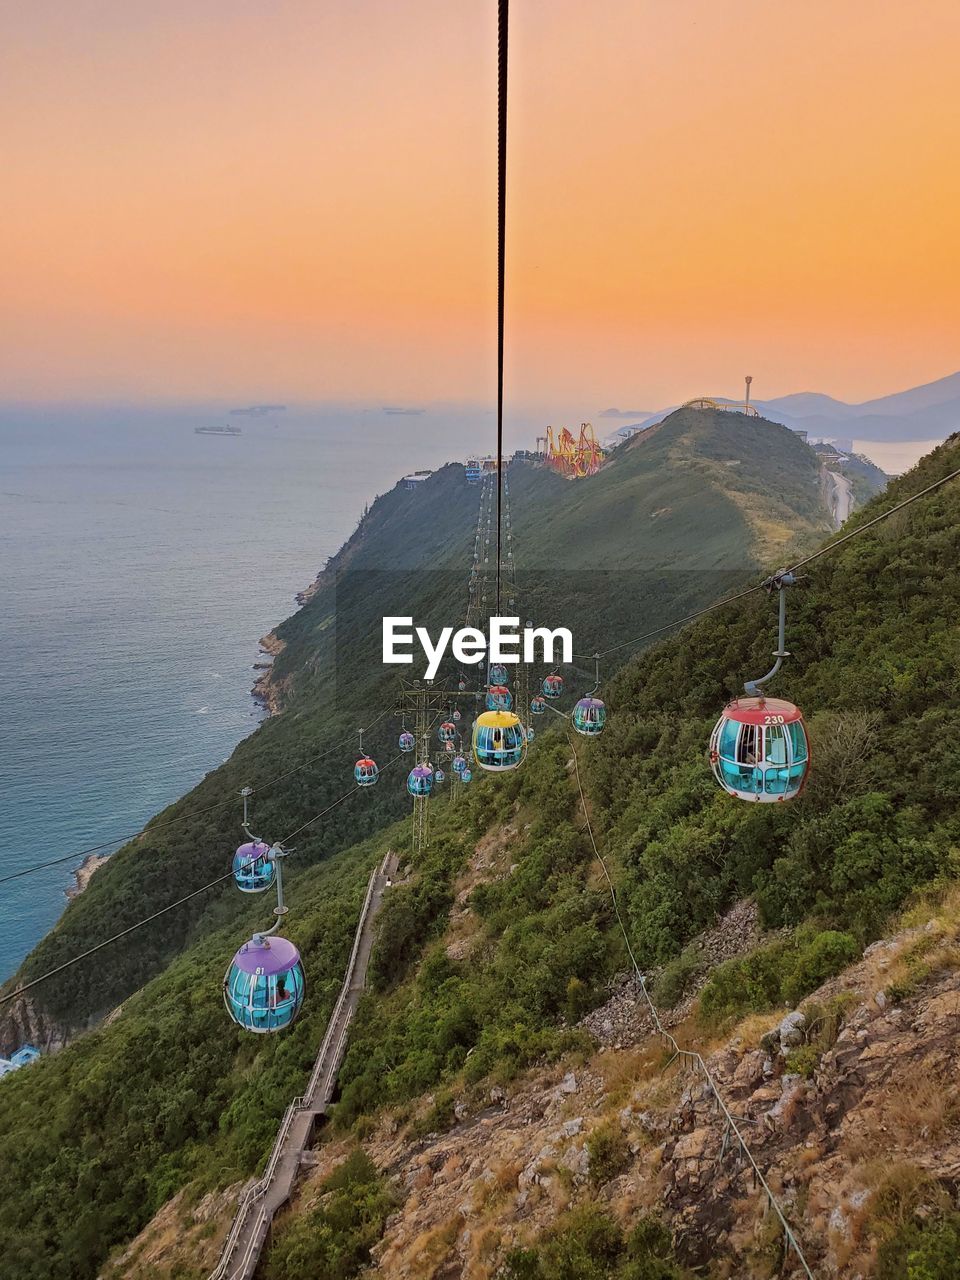 OVERHEAD CABLE CAR ON SEA BY MOUNTAINS AGAINST SKY